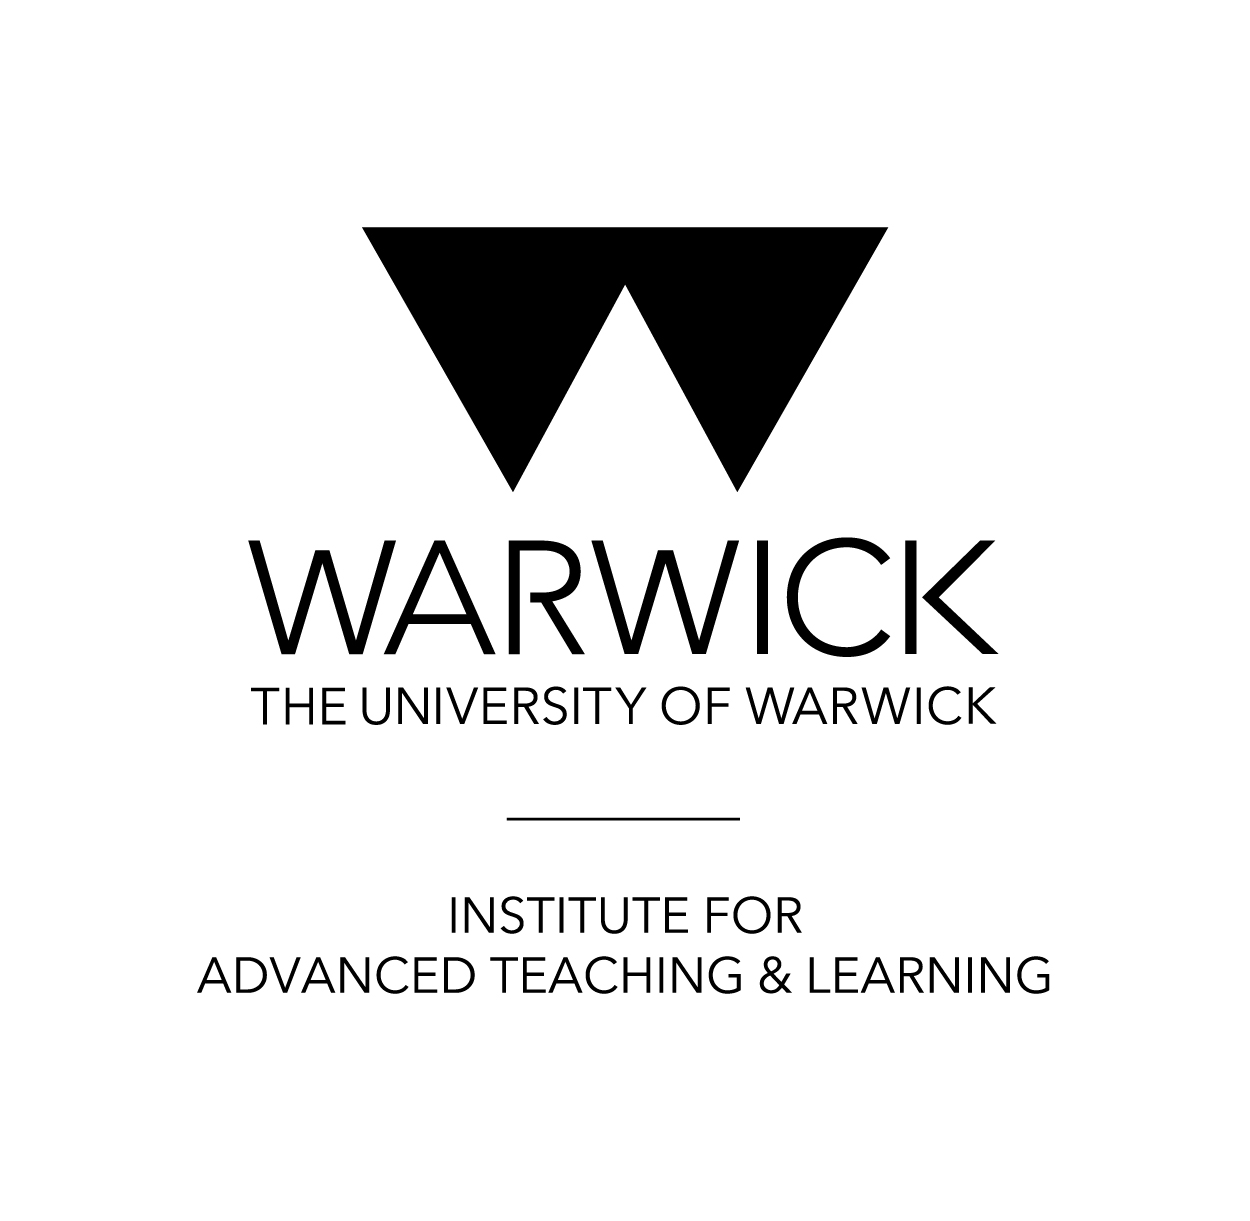 University of Warwick - Institute for Advanced Teaching and Learning